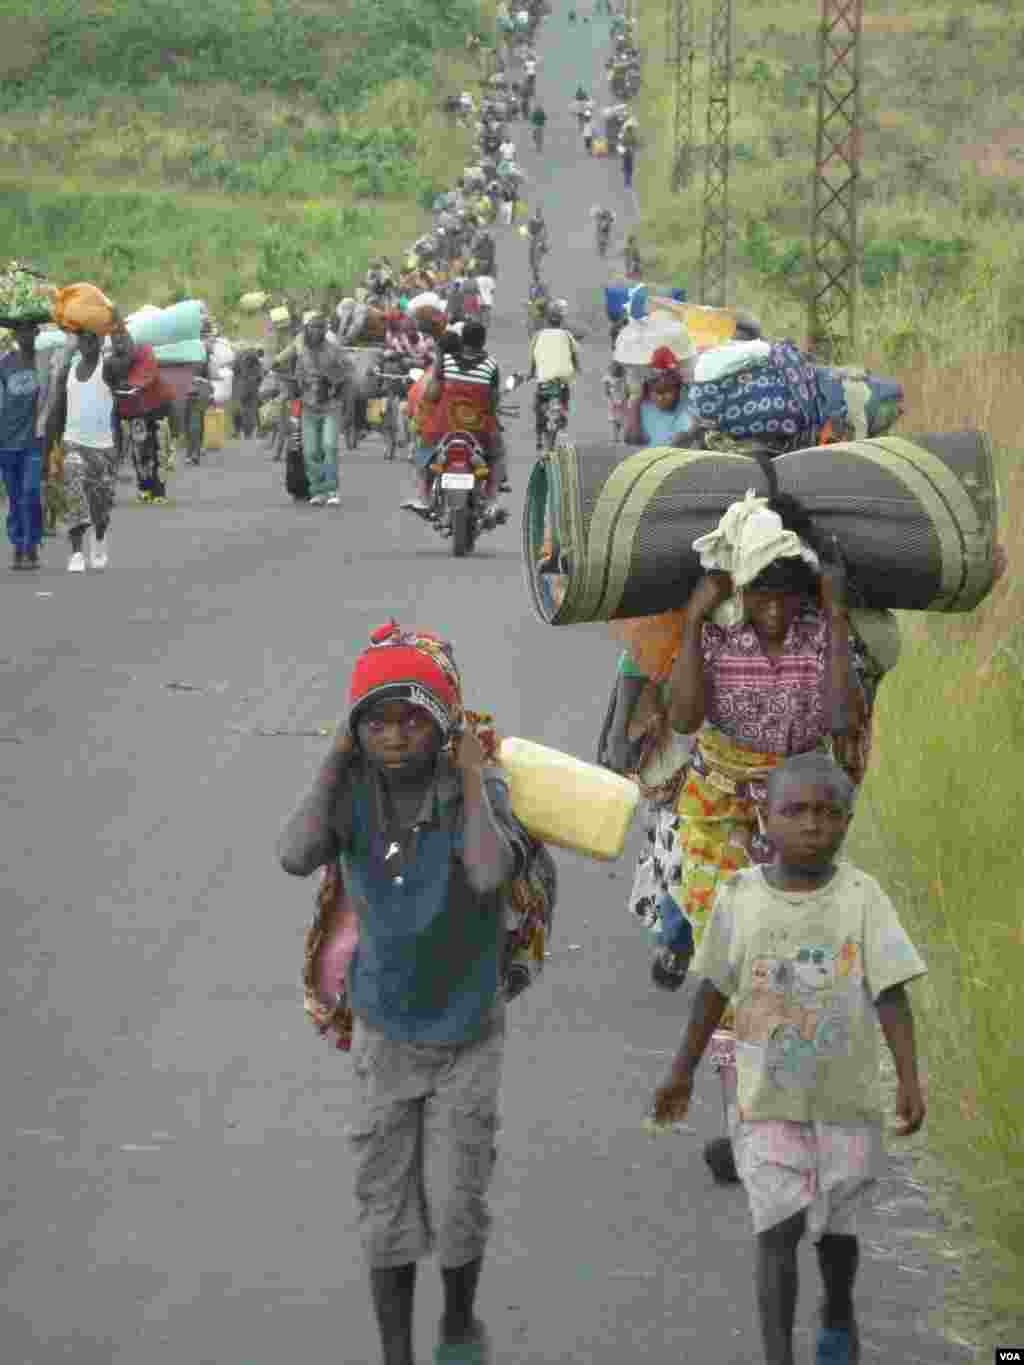 Fighting has displaced tens of thousands of people from the town of Sake, west of Goma, DRC, November 23, 2011. (G. Joselow/VOA)